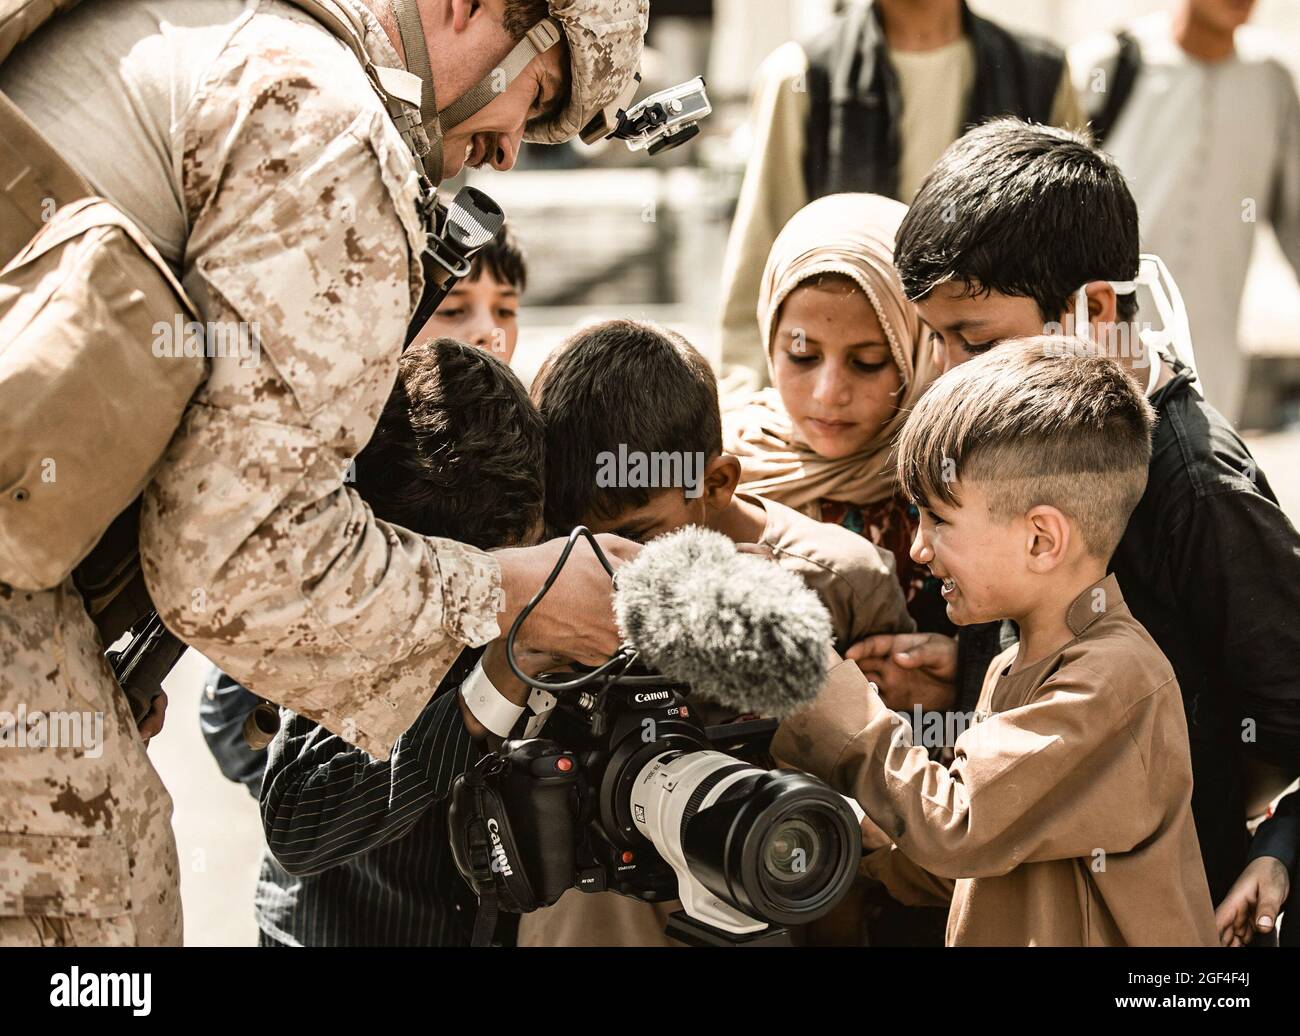 A U.S. Marine assigned to Special Purpose Marine Air-Ground Task Force – Crisis Response – Central Command shows his video camera to children awaiting evacuation at Hamid Karzai International Airport, Afghanistan, Aug. 22, 2021. The U.S. is assisting the Department of State with a Non-Combatant Evacuation Operation (NEO) in Afghanistan. (U.S. Marine Corps photo by Gunnery Sgt. Melissa Marnell) Stock Photo